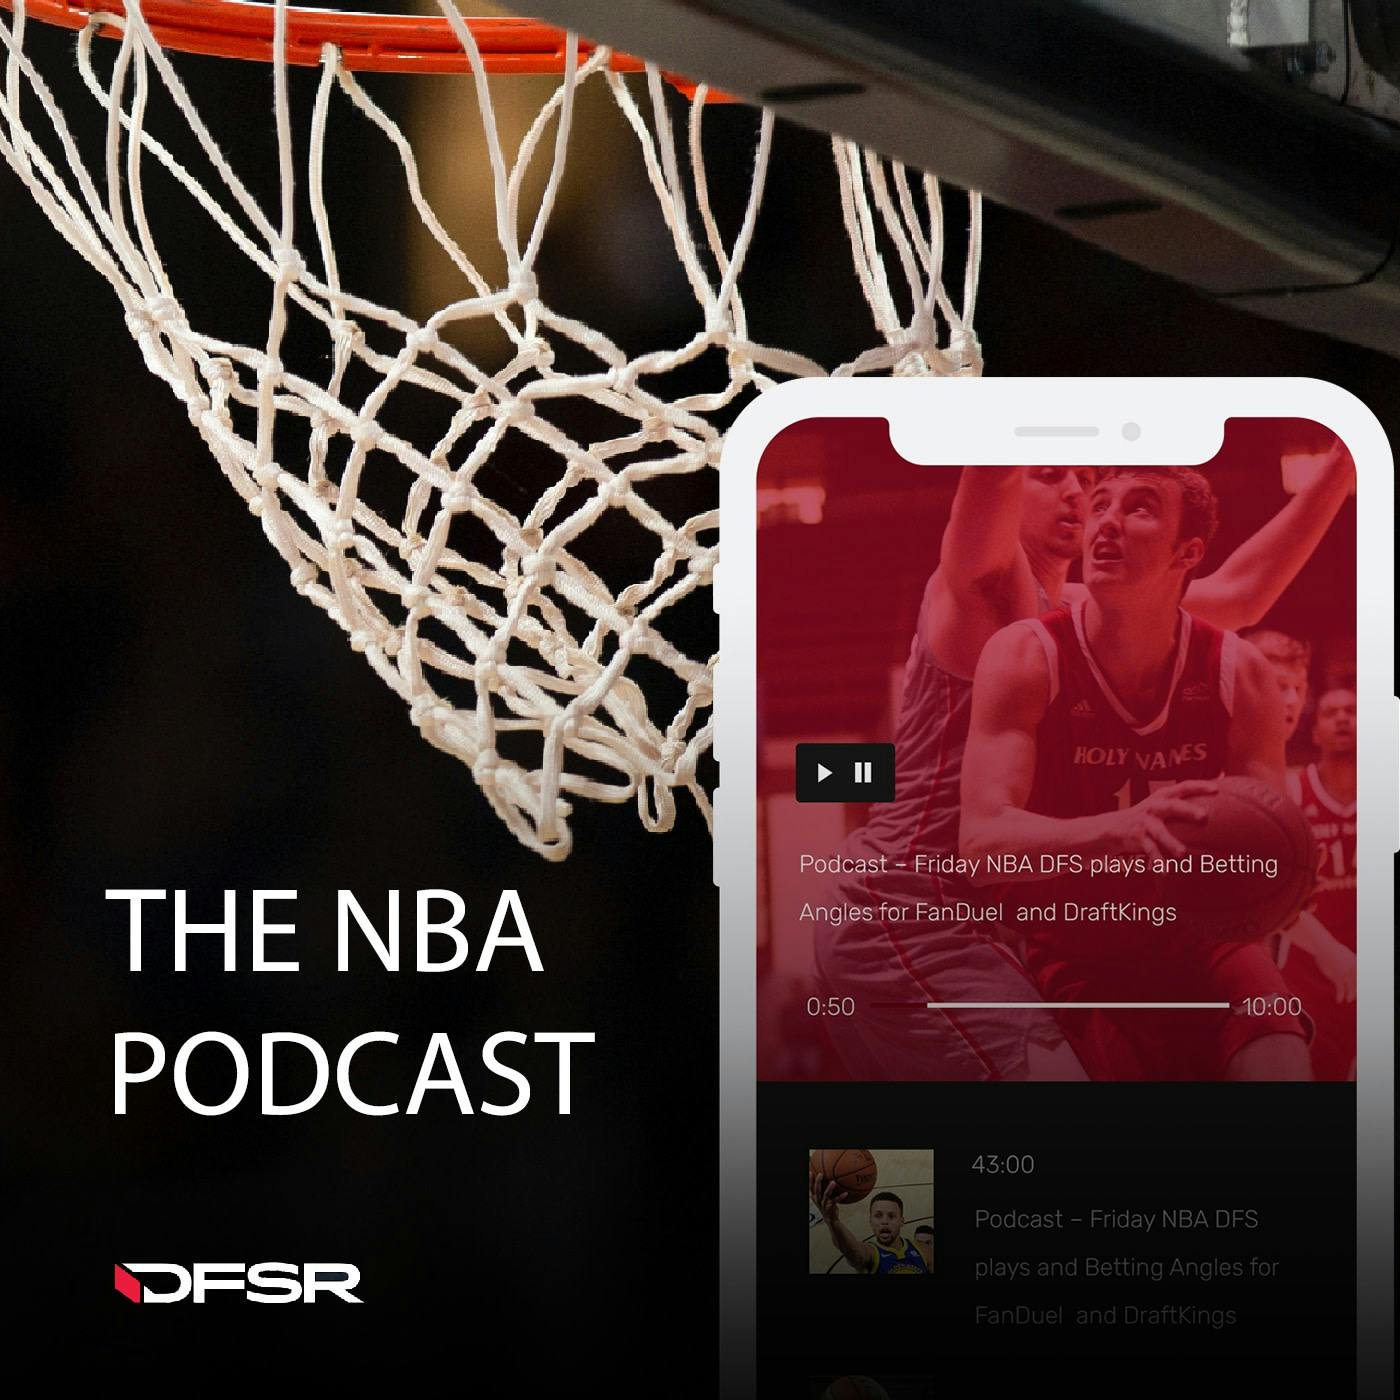 DFS NBA Podcast for Friday 10/19/18 - FanDuel and DraftKings